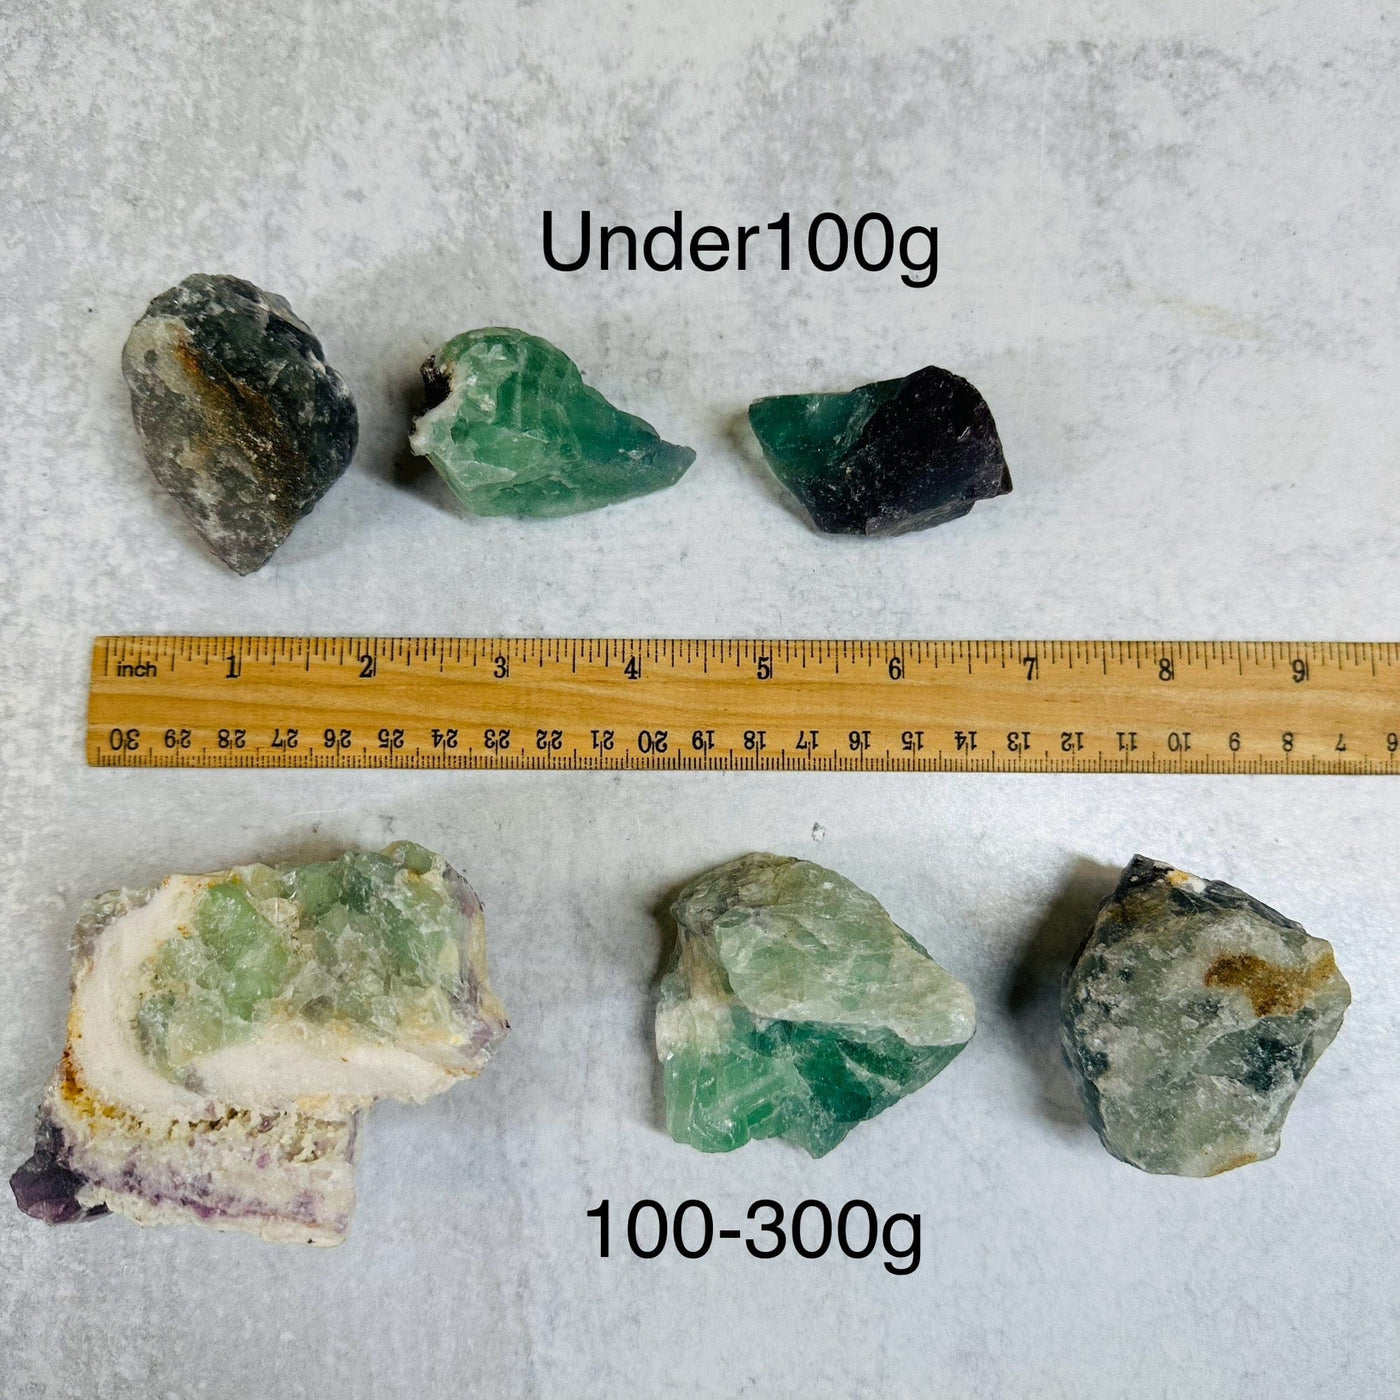 Fluorite Rough Stone - By Weight next to a ruler for size reference 